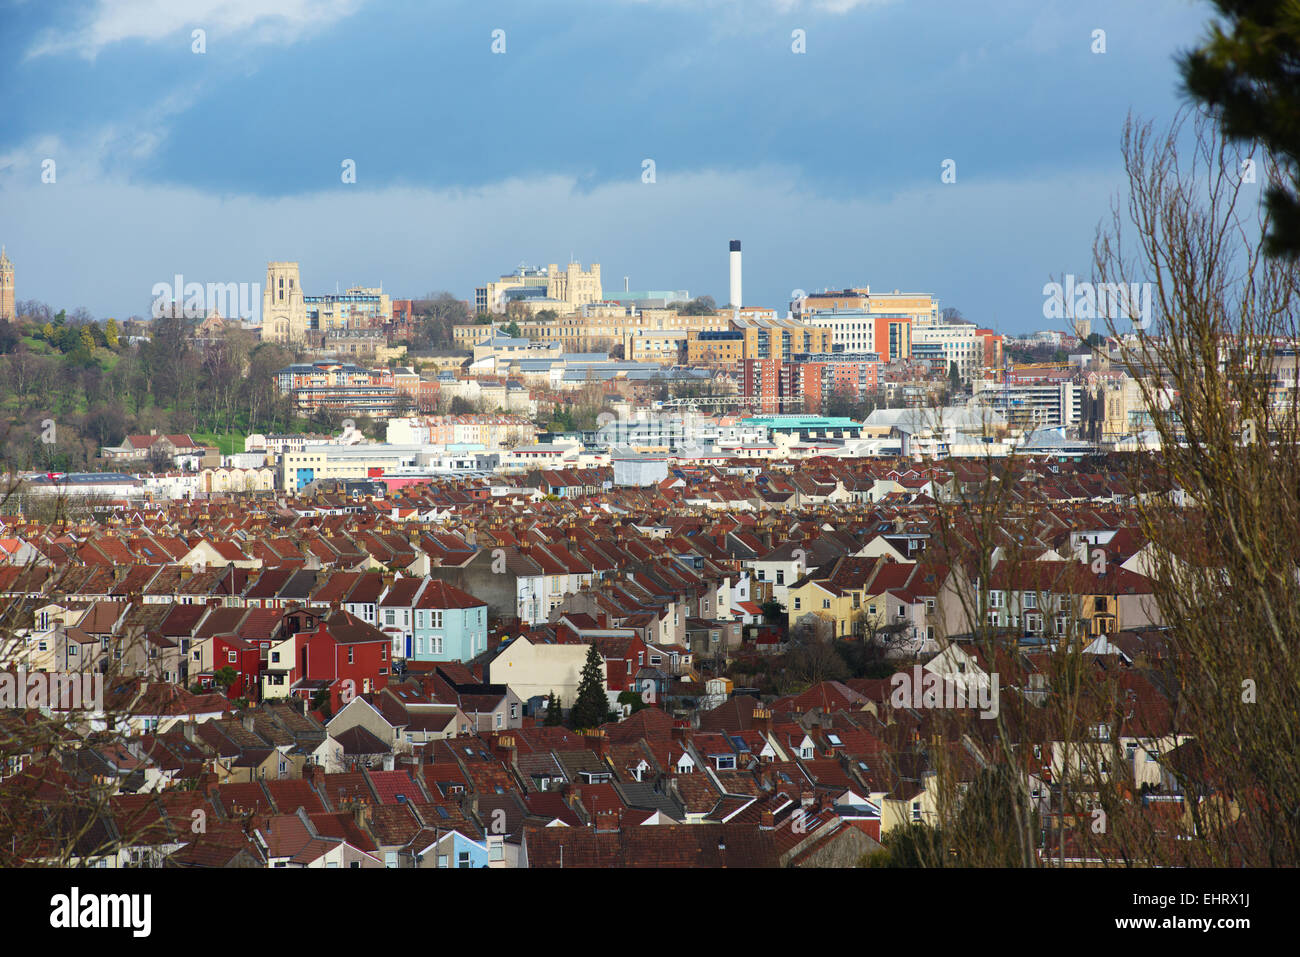 Urban skyline, Bristol, University and hospital buildings on top of hill with Bedminster and central city housing below Stock Photo